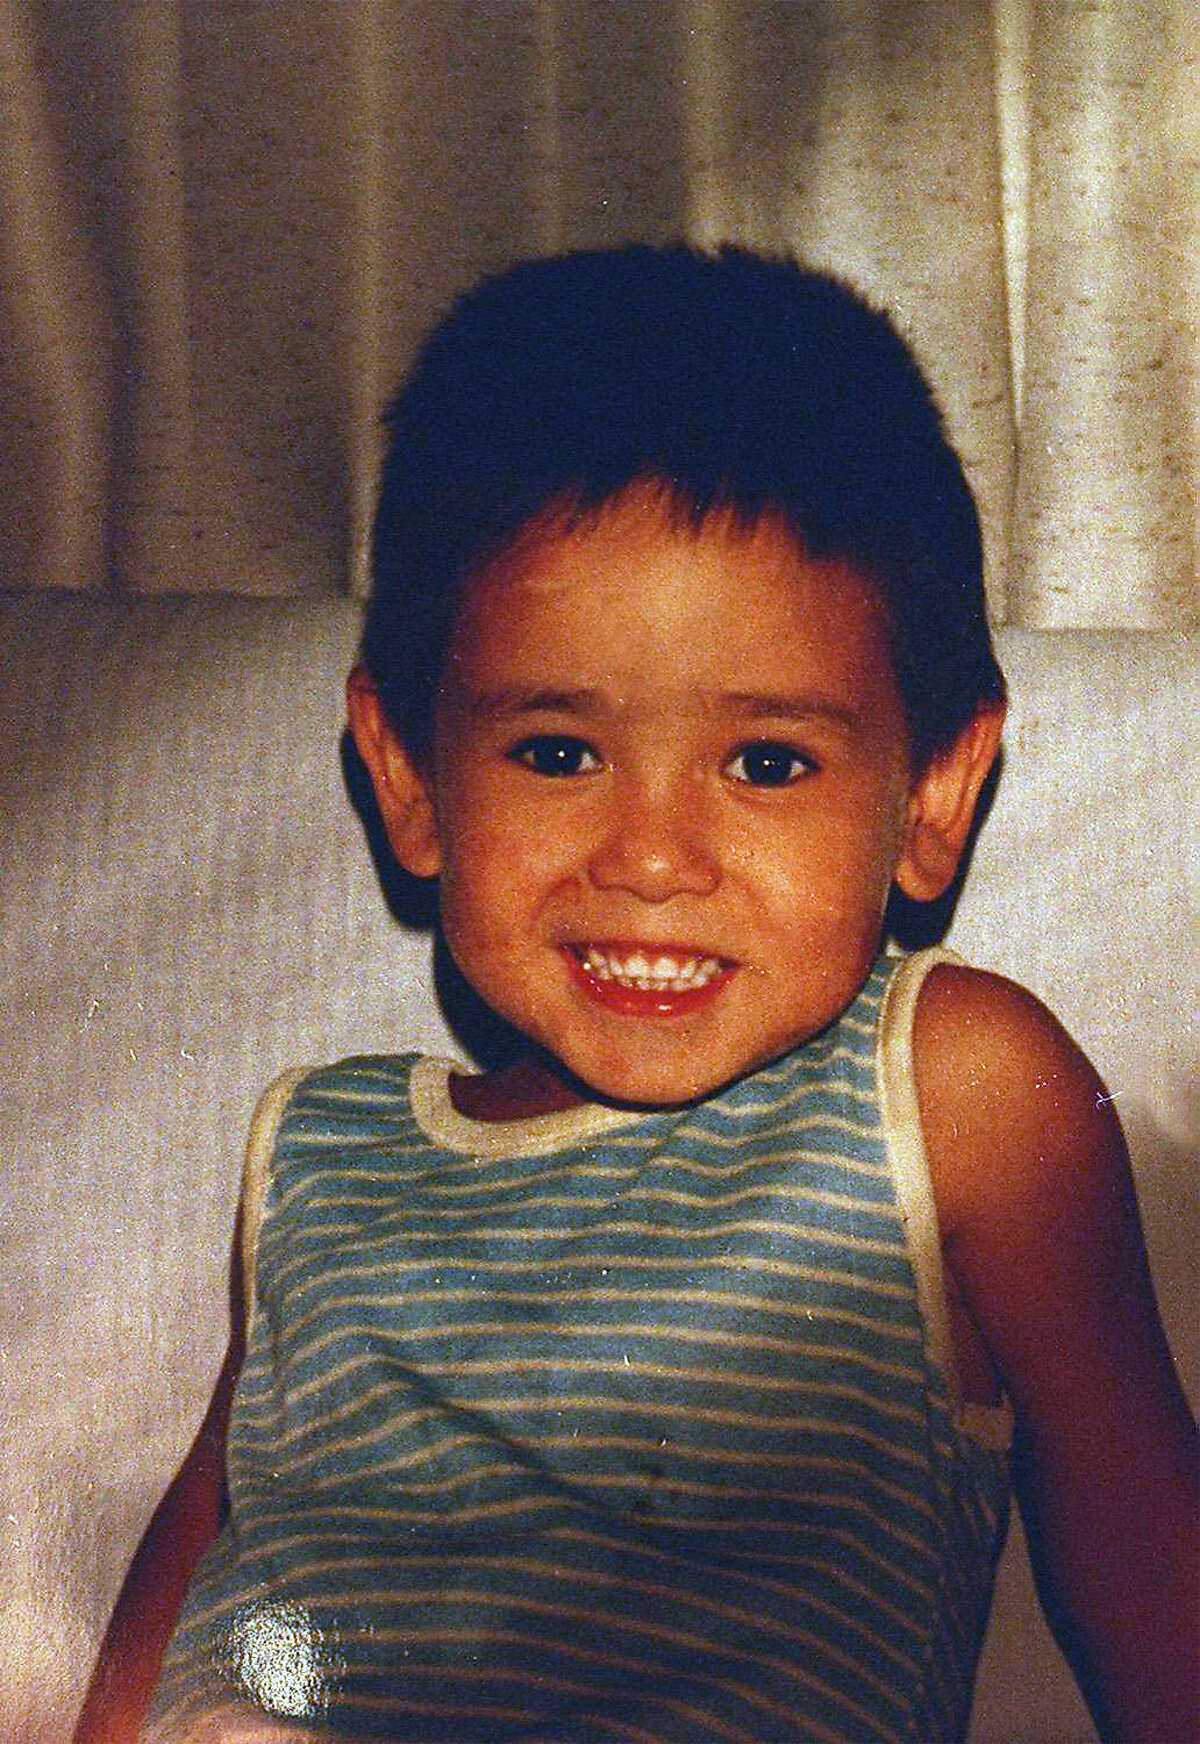 Clark Toshiro Handa, pictured at age 3, disappeared on August 22, 1984.